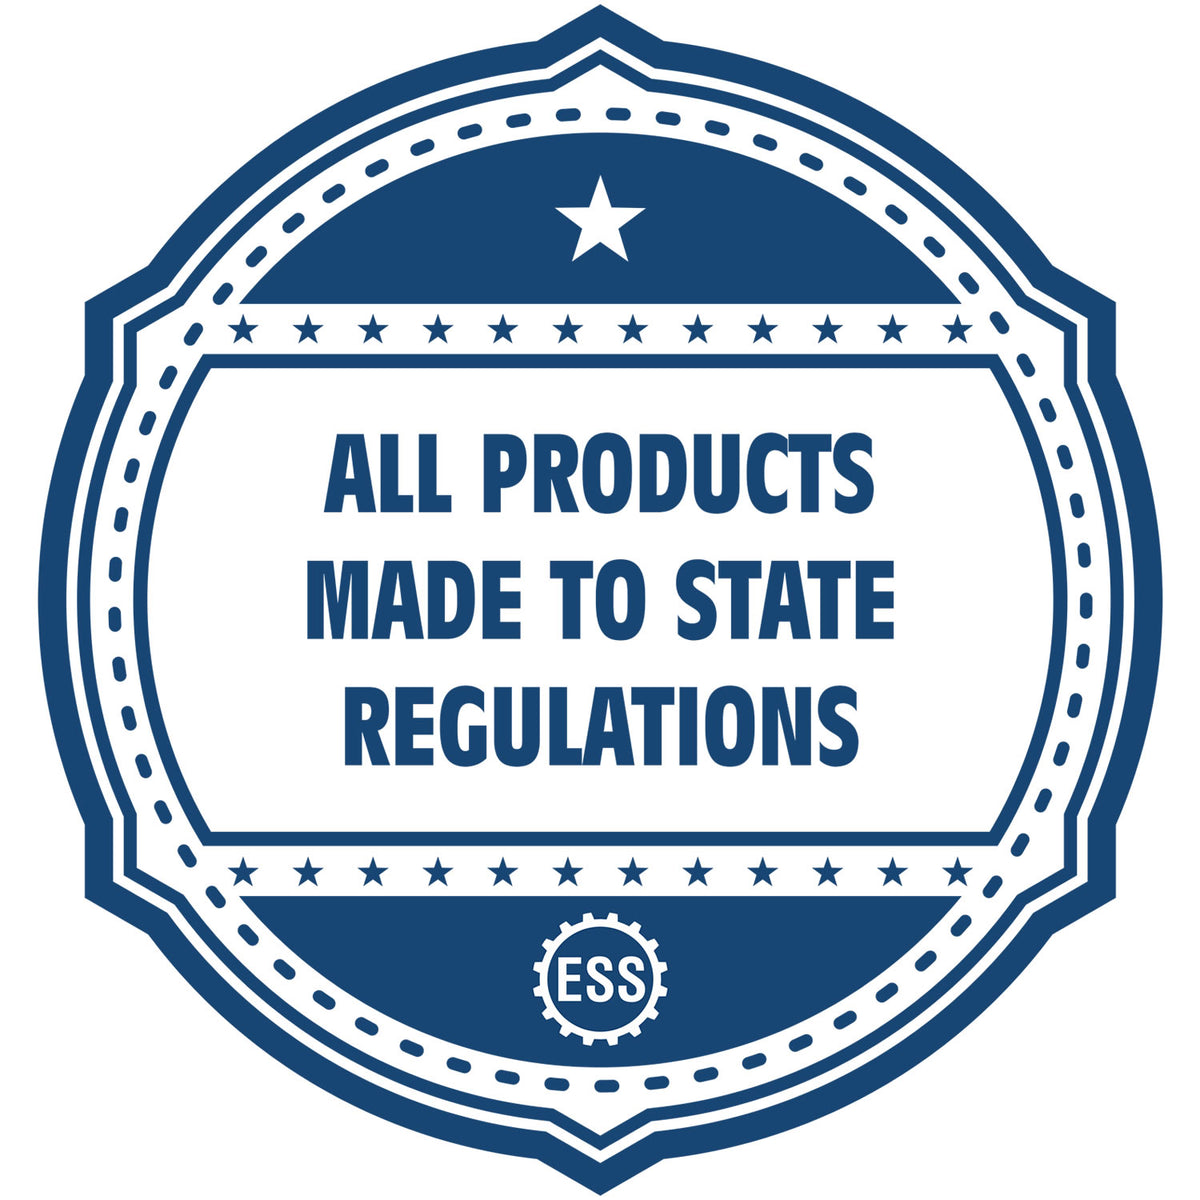 An icon or badge element for the New Jersey Desk Architect Embossing Seal showing that this product is made in compliance with state regulations.